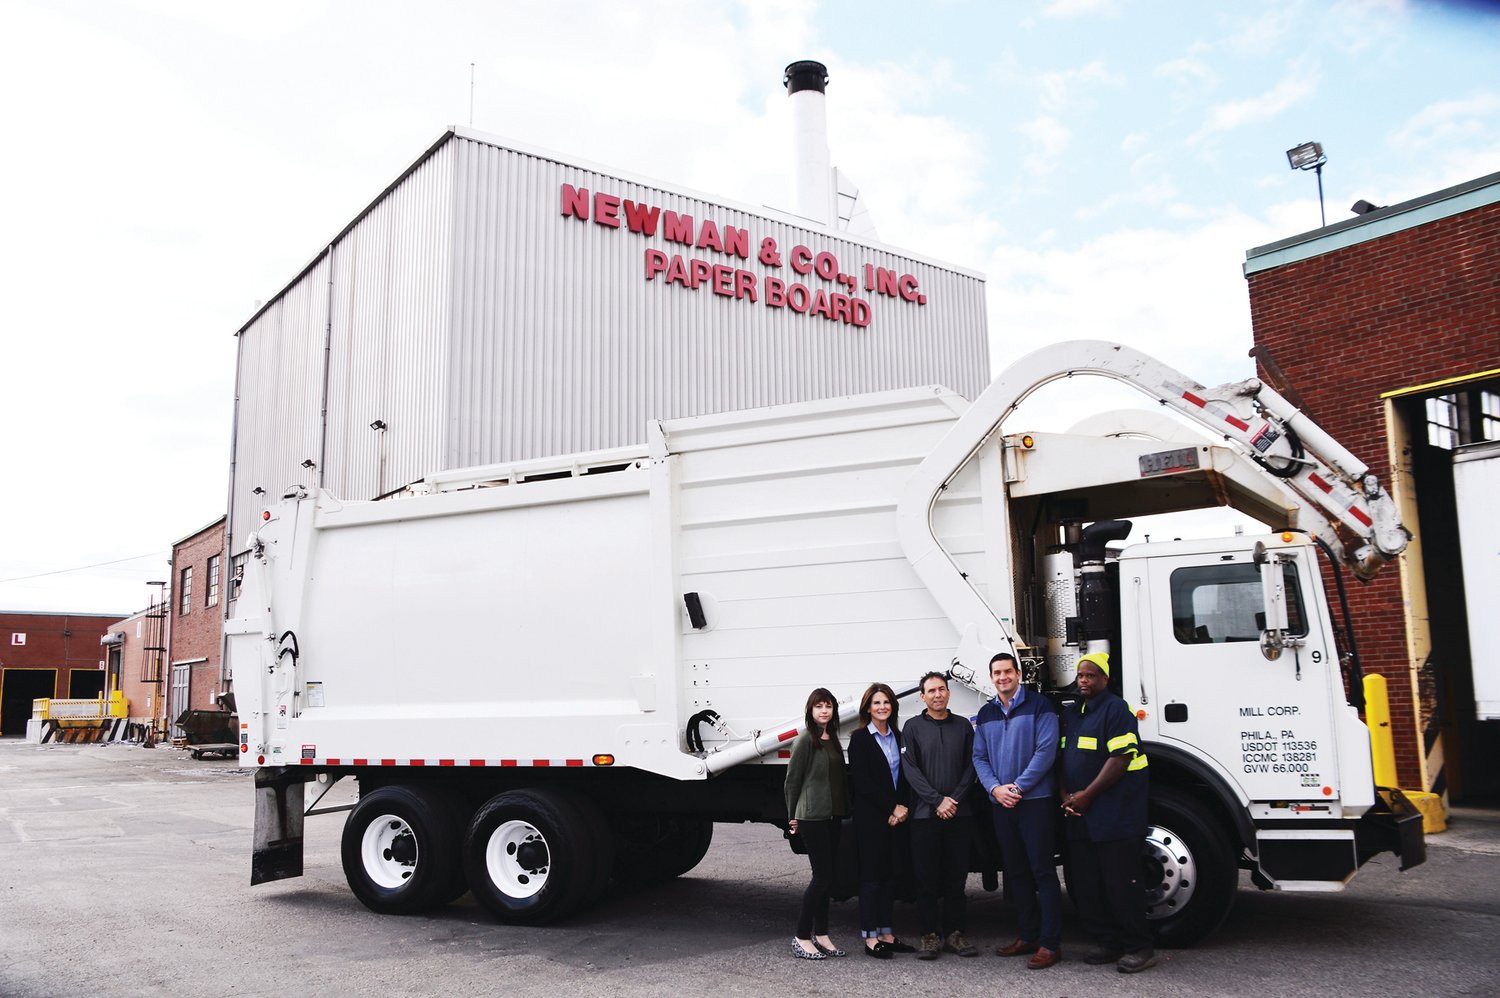 From left are: Chelsea Zoladz, logistics coordinator; Jessica Newman Solomon, president of United States Recycling Inc.; David Newman, vice-president and general manager of Newman & Co. Inc.; Brian Ostrowsky, Paper Retriever Program manager; and Mark Warner, driver.